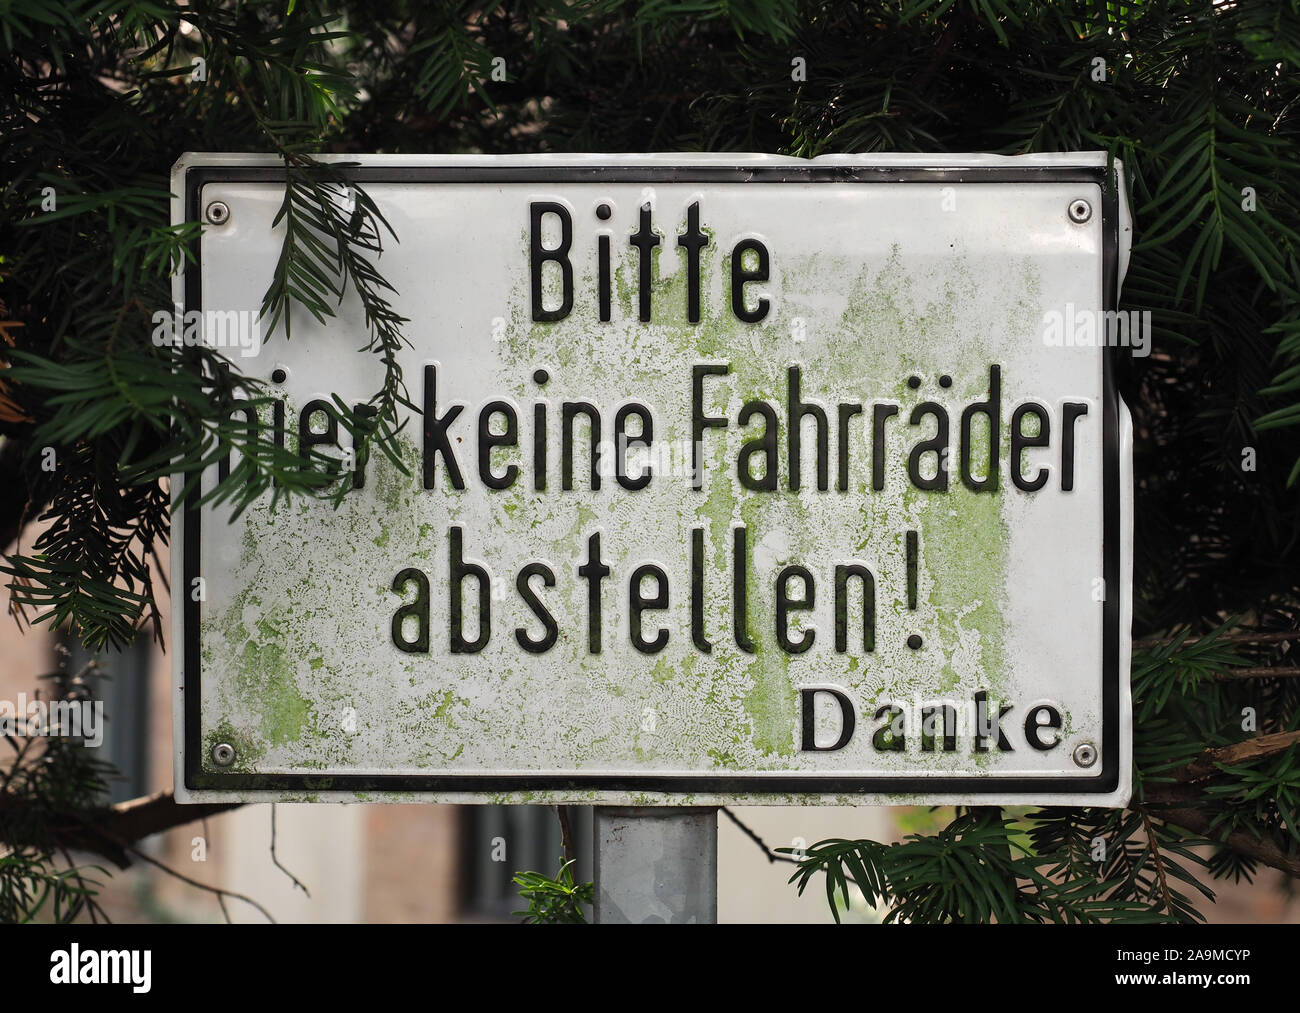 Bitte hier keine Fahrraeder abstellen (meaning Please do not park bicycles here) sign Stock Photo